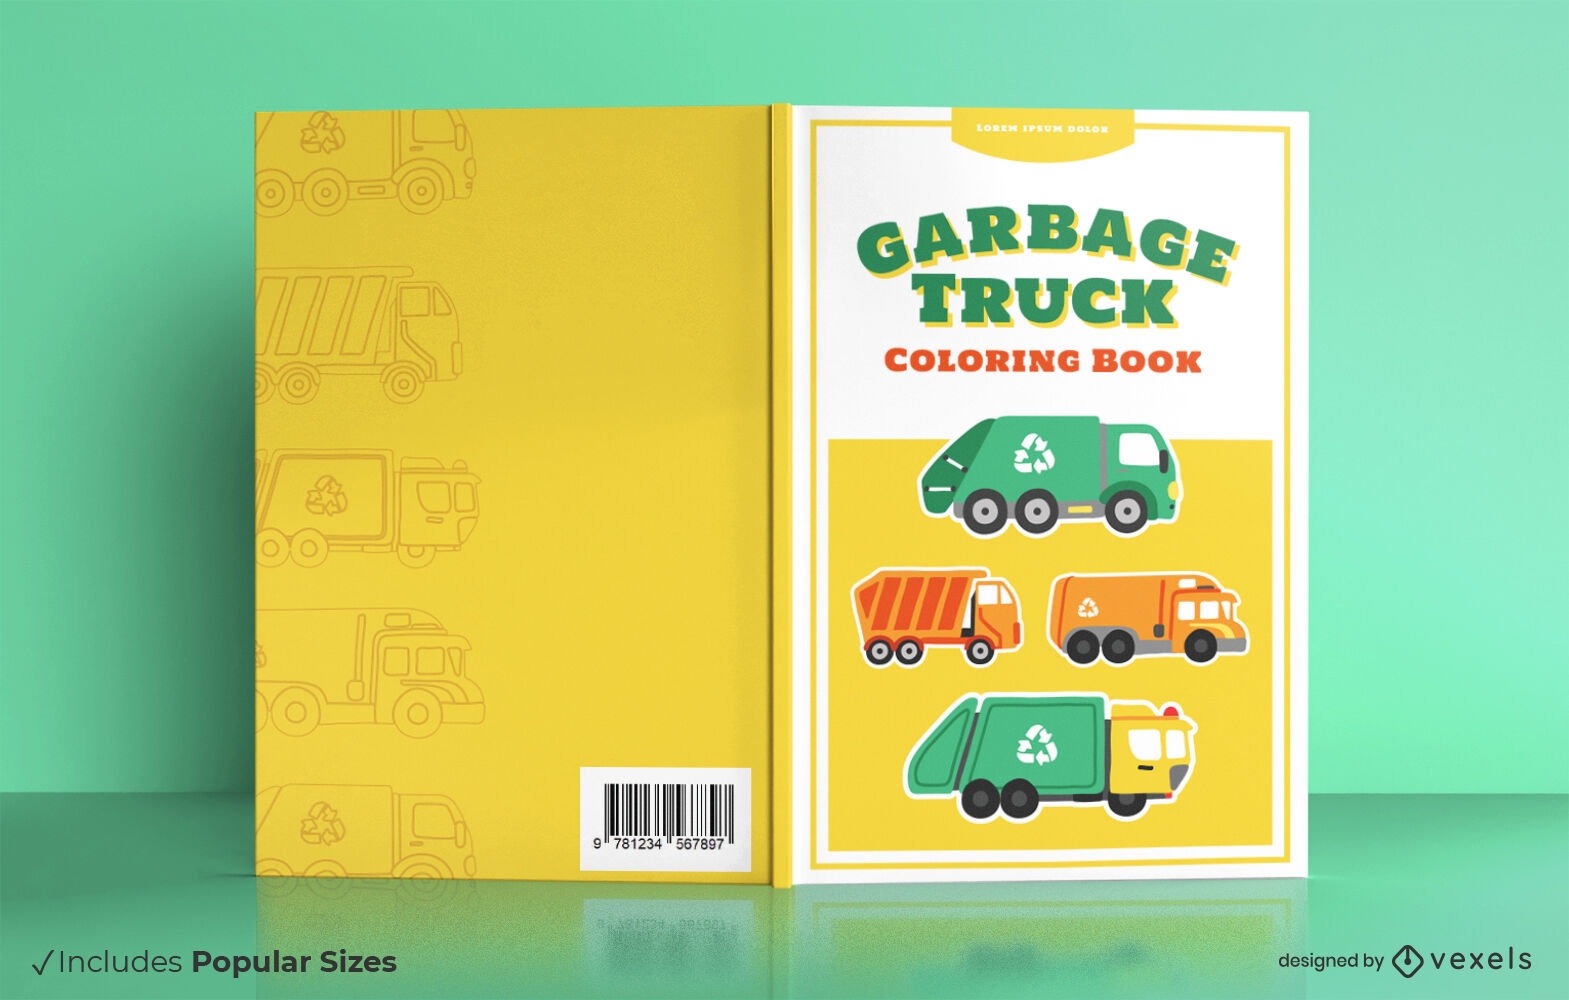 Garbage truck coloring book cover design